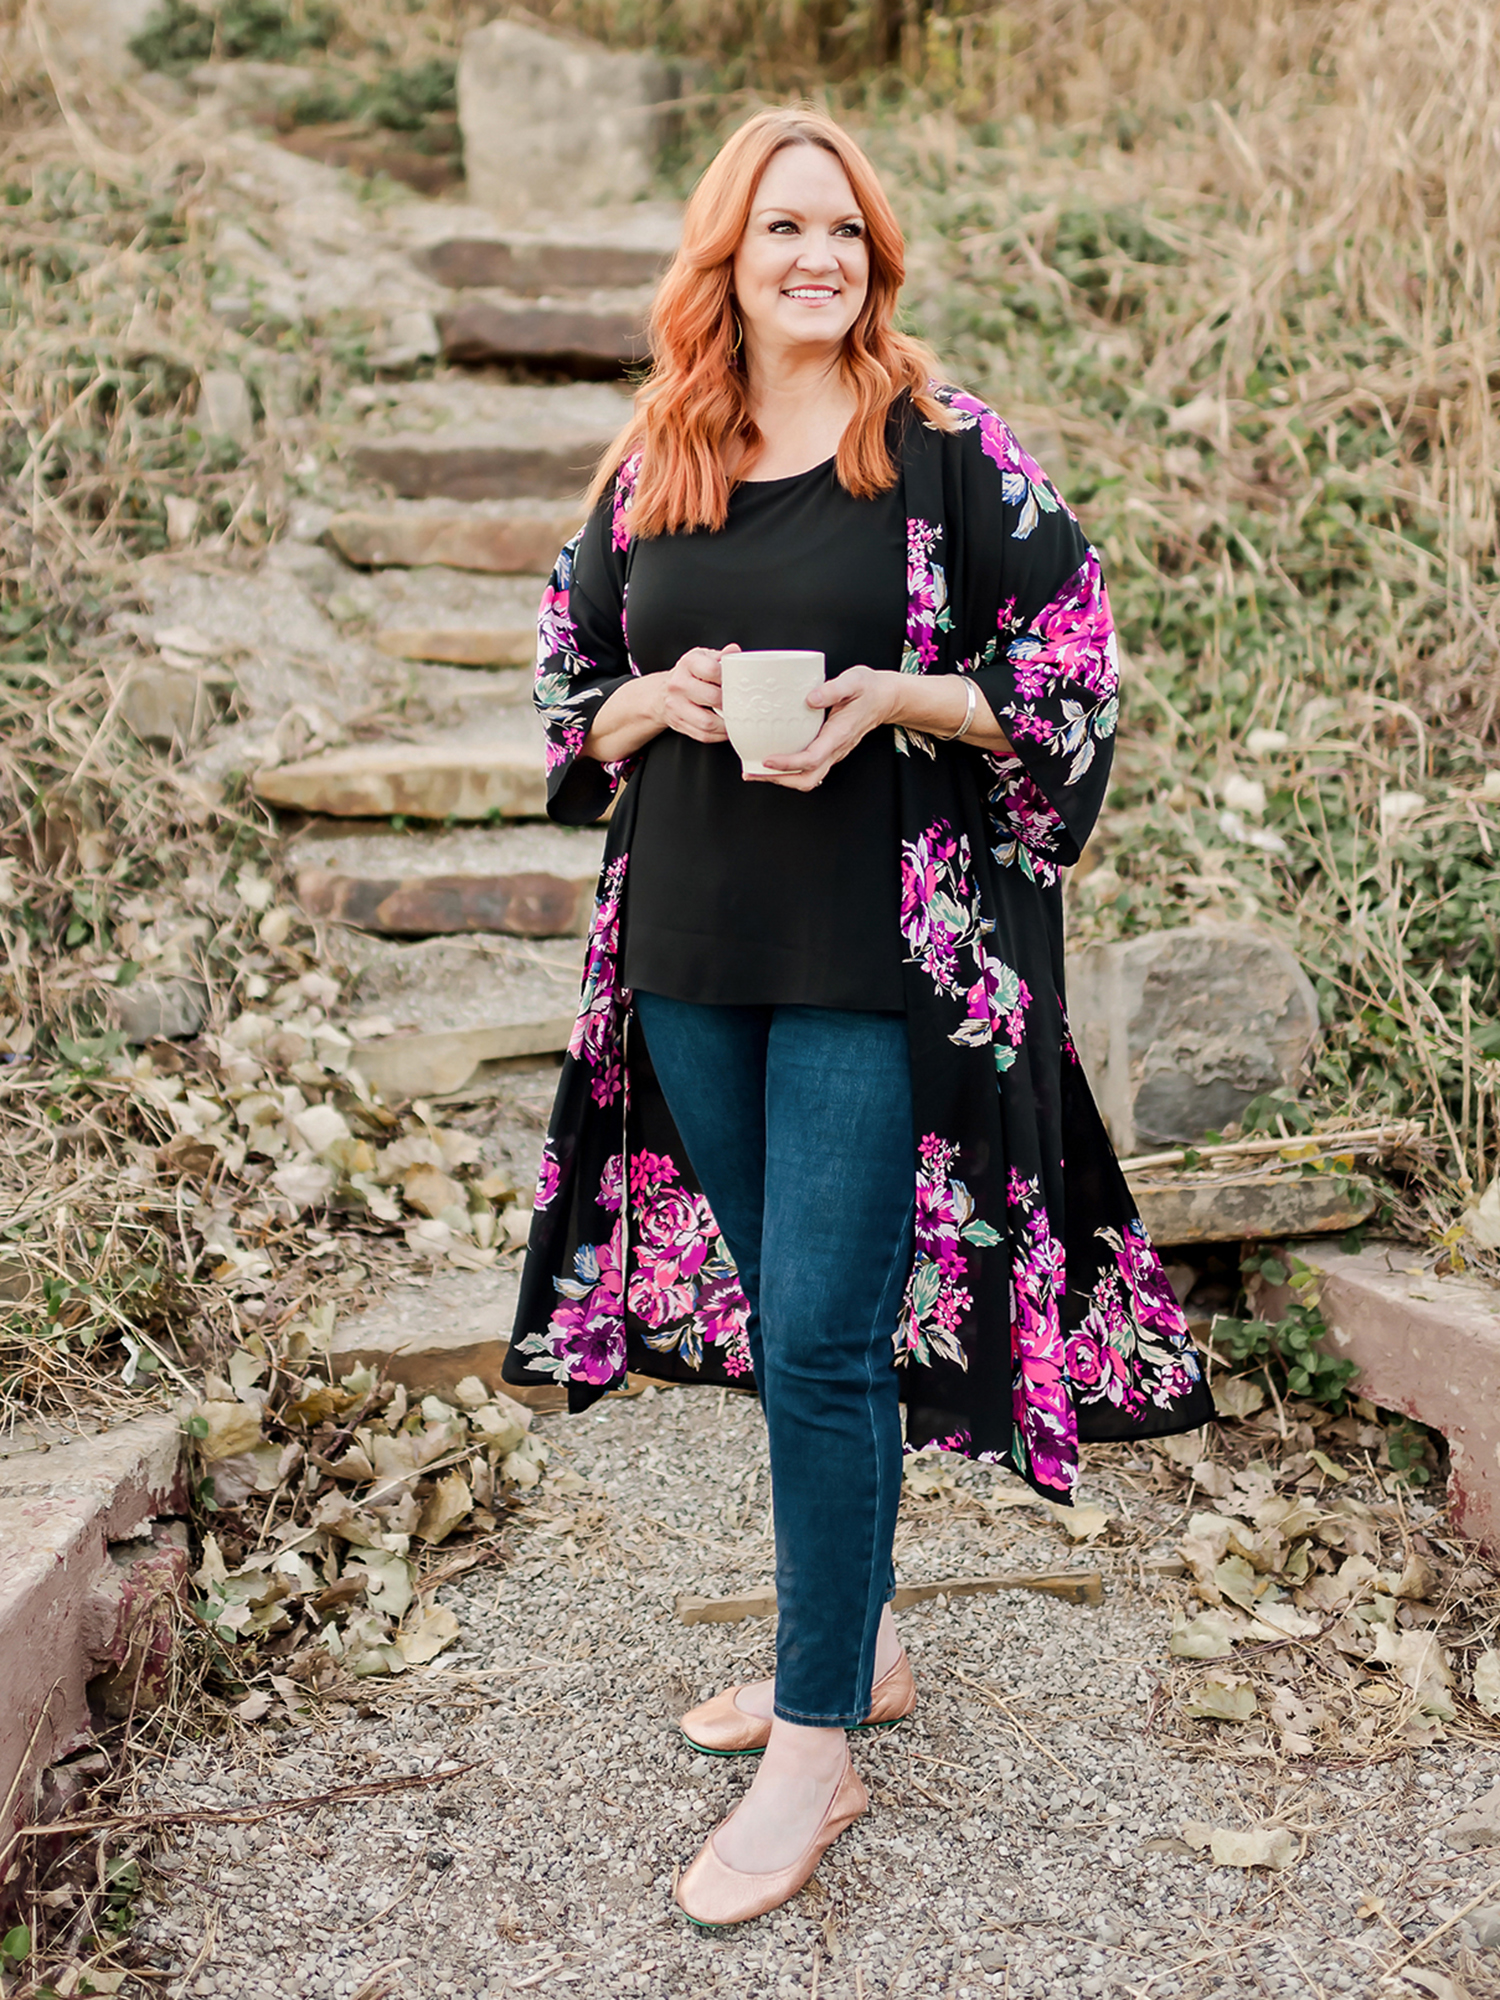 Pioneer Woman Ree Drummond is launching a clothing line at Walmart